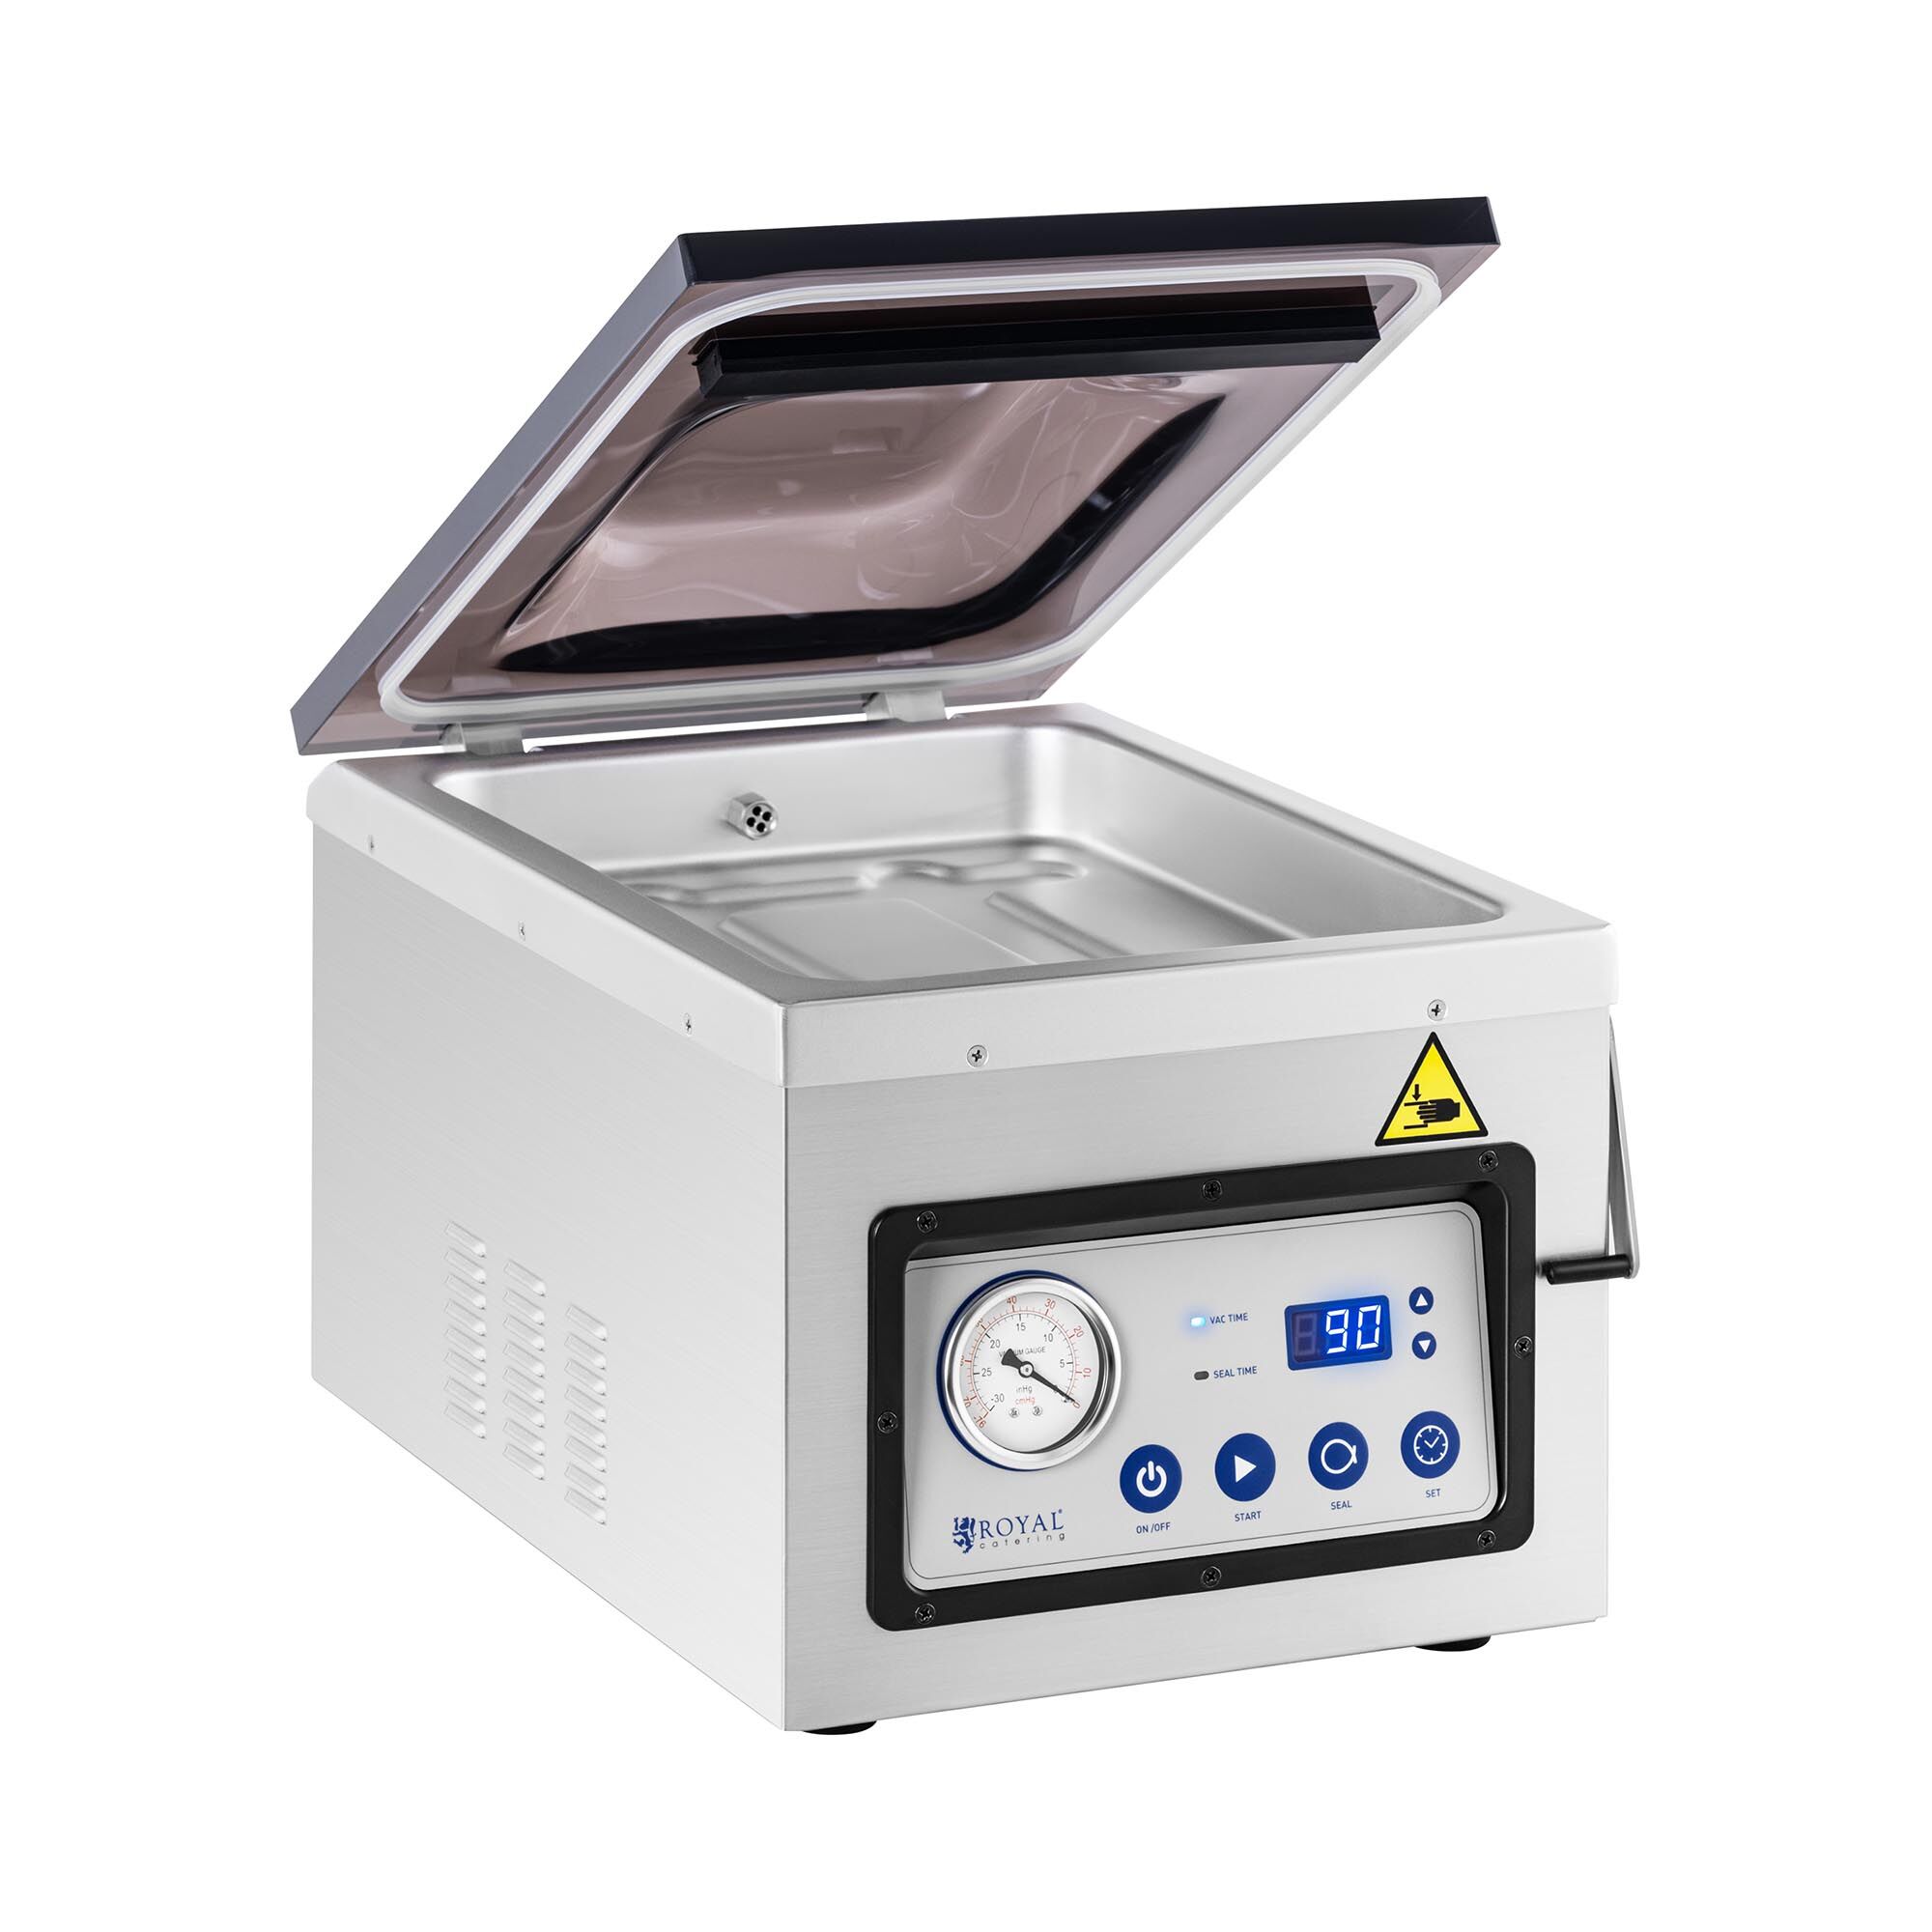 Royal Catering Vacuum Packing Machine - 1,000 W - 26 cm - stainless steel RCVG-47